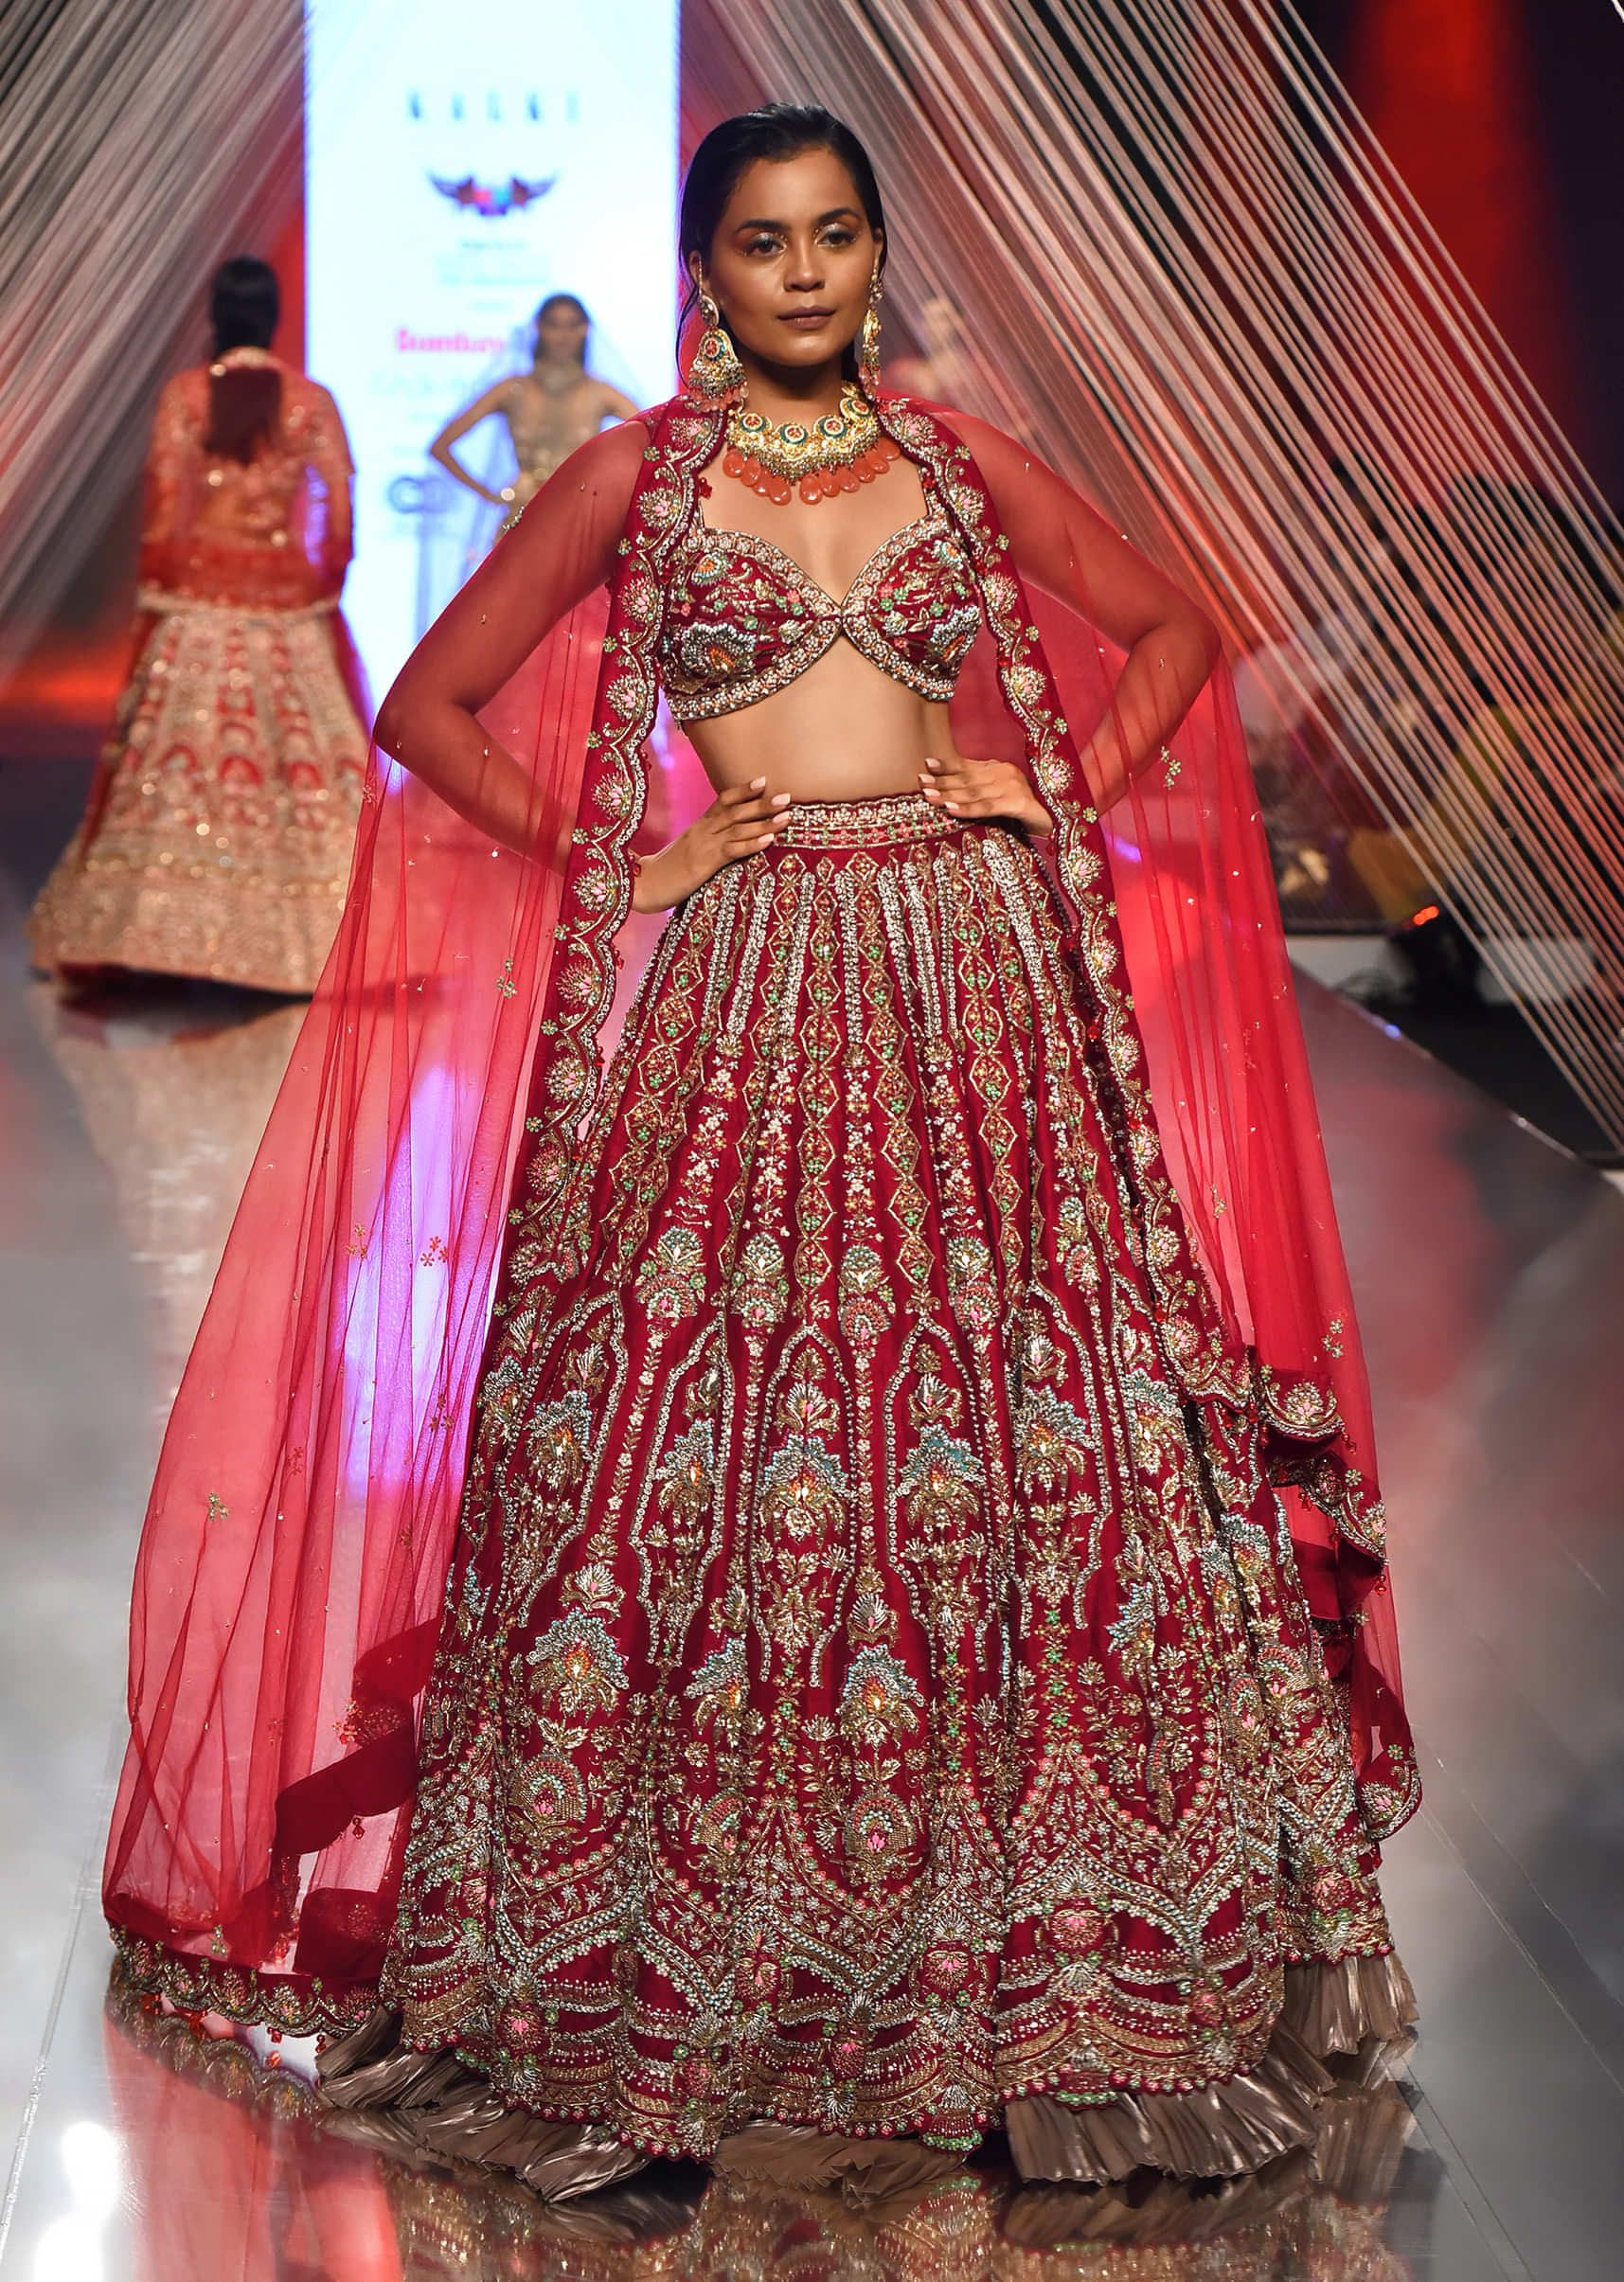 Red Lehenga And A Crop Top In Royal Heritage Embroidery, Bustier Comes In Sleeveless With Back Hooks Closure